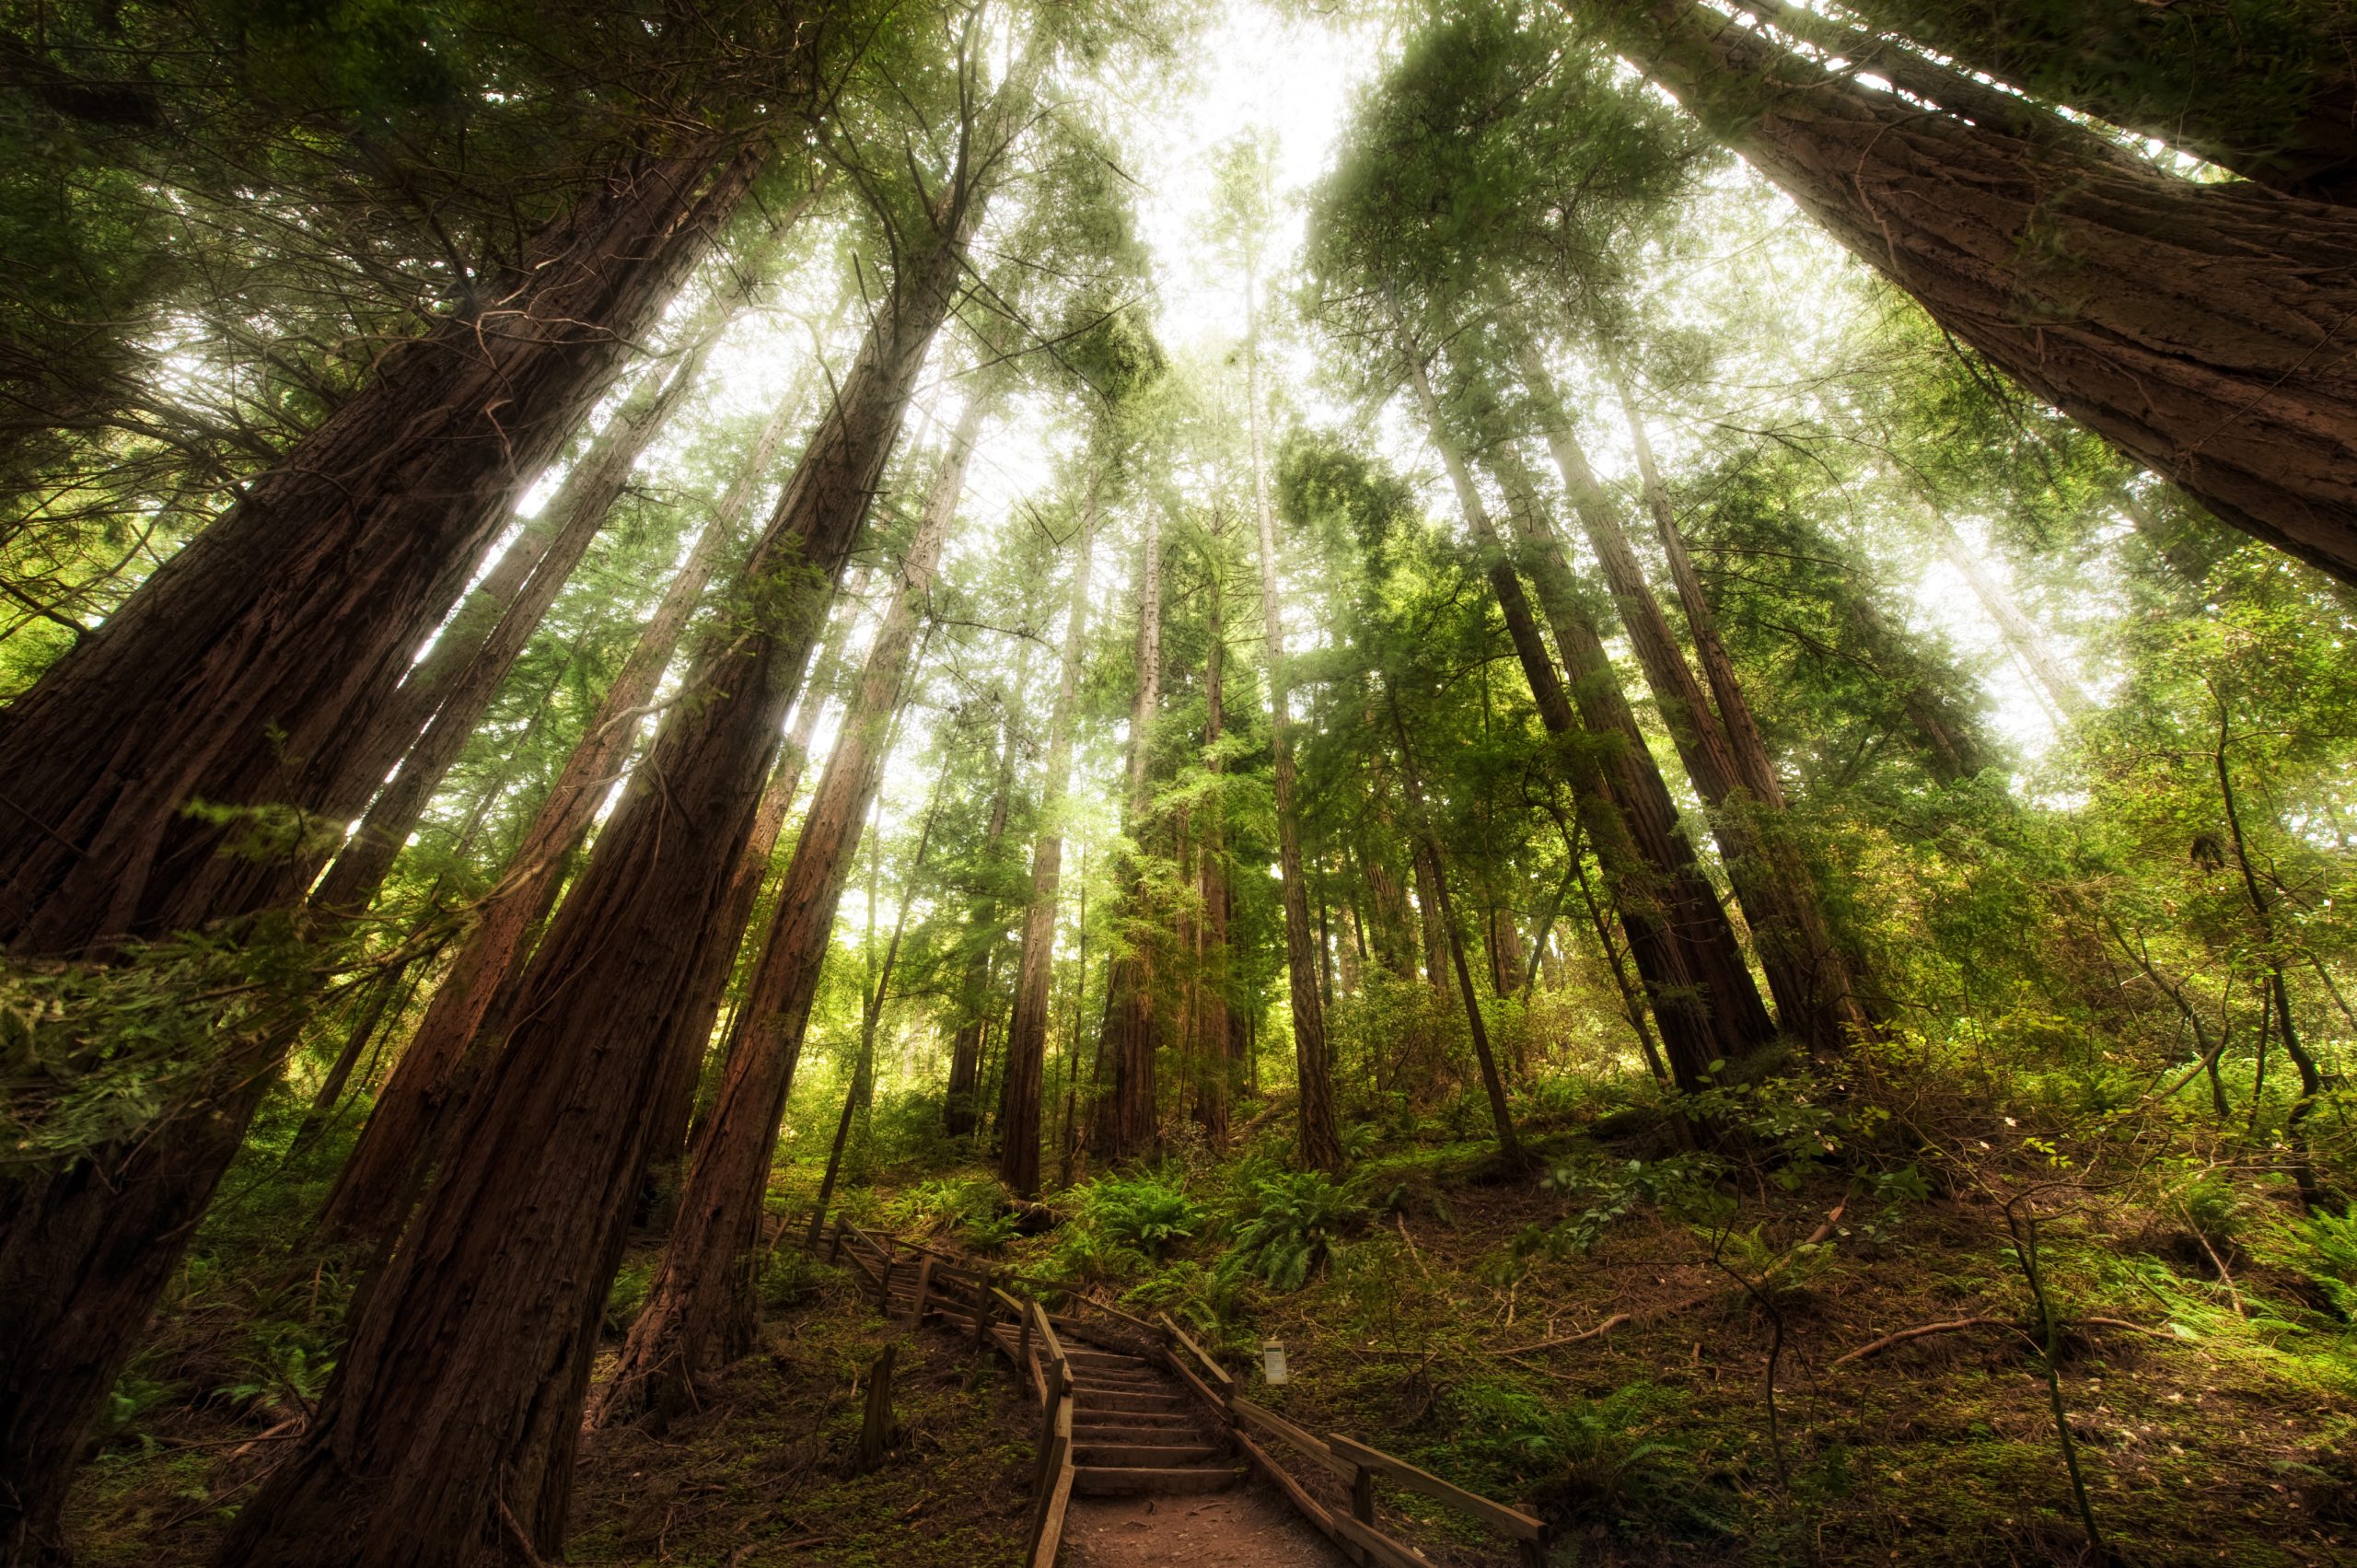 large redwood trees surround a small wooden path